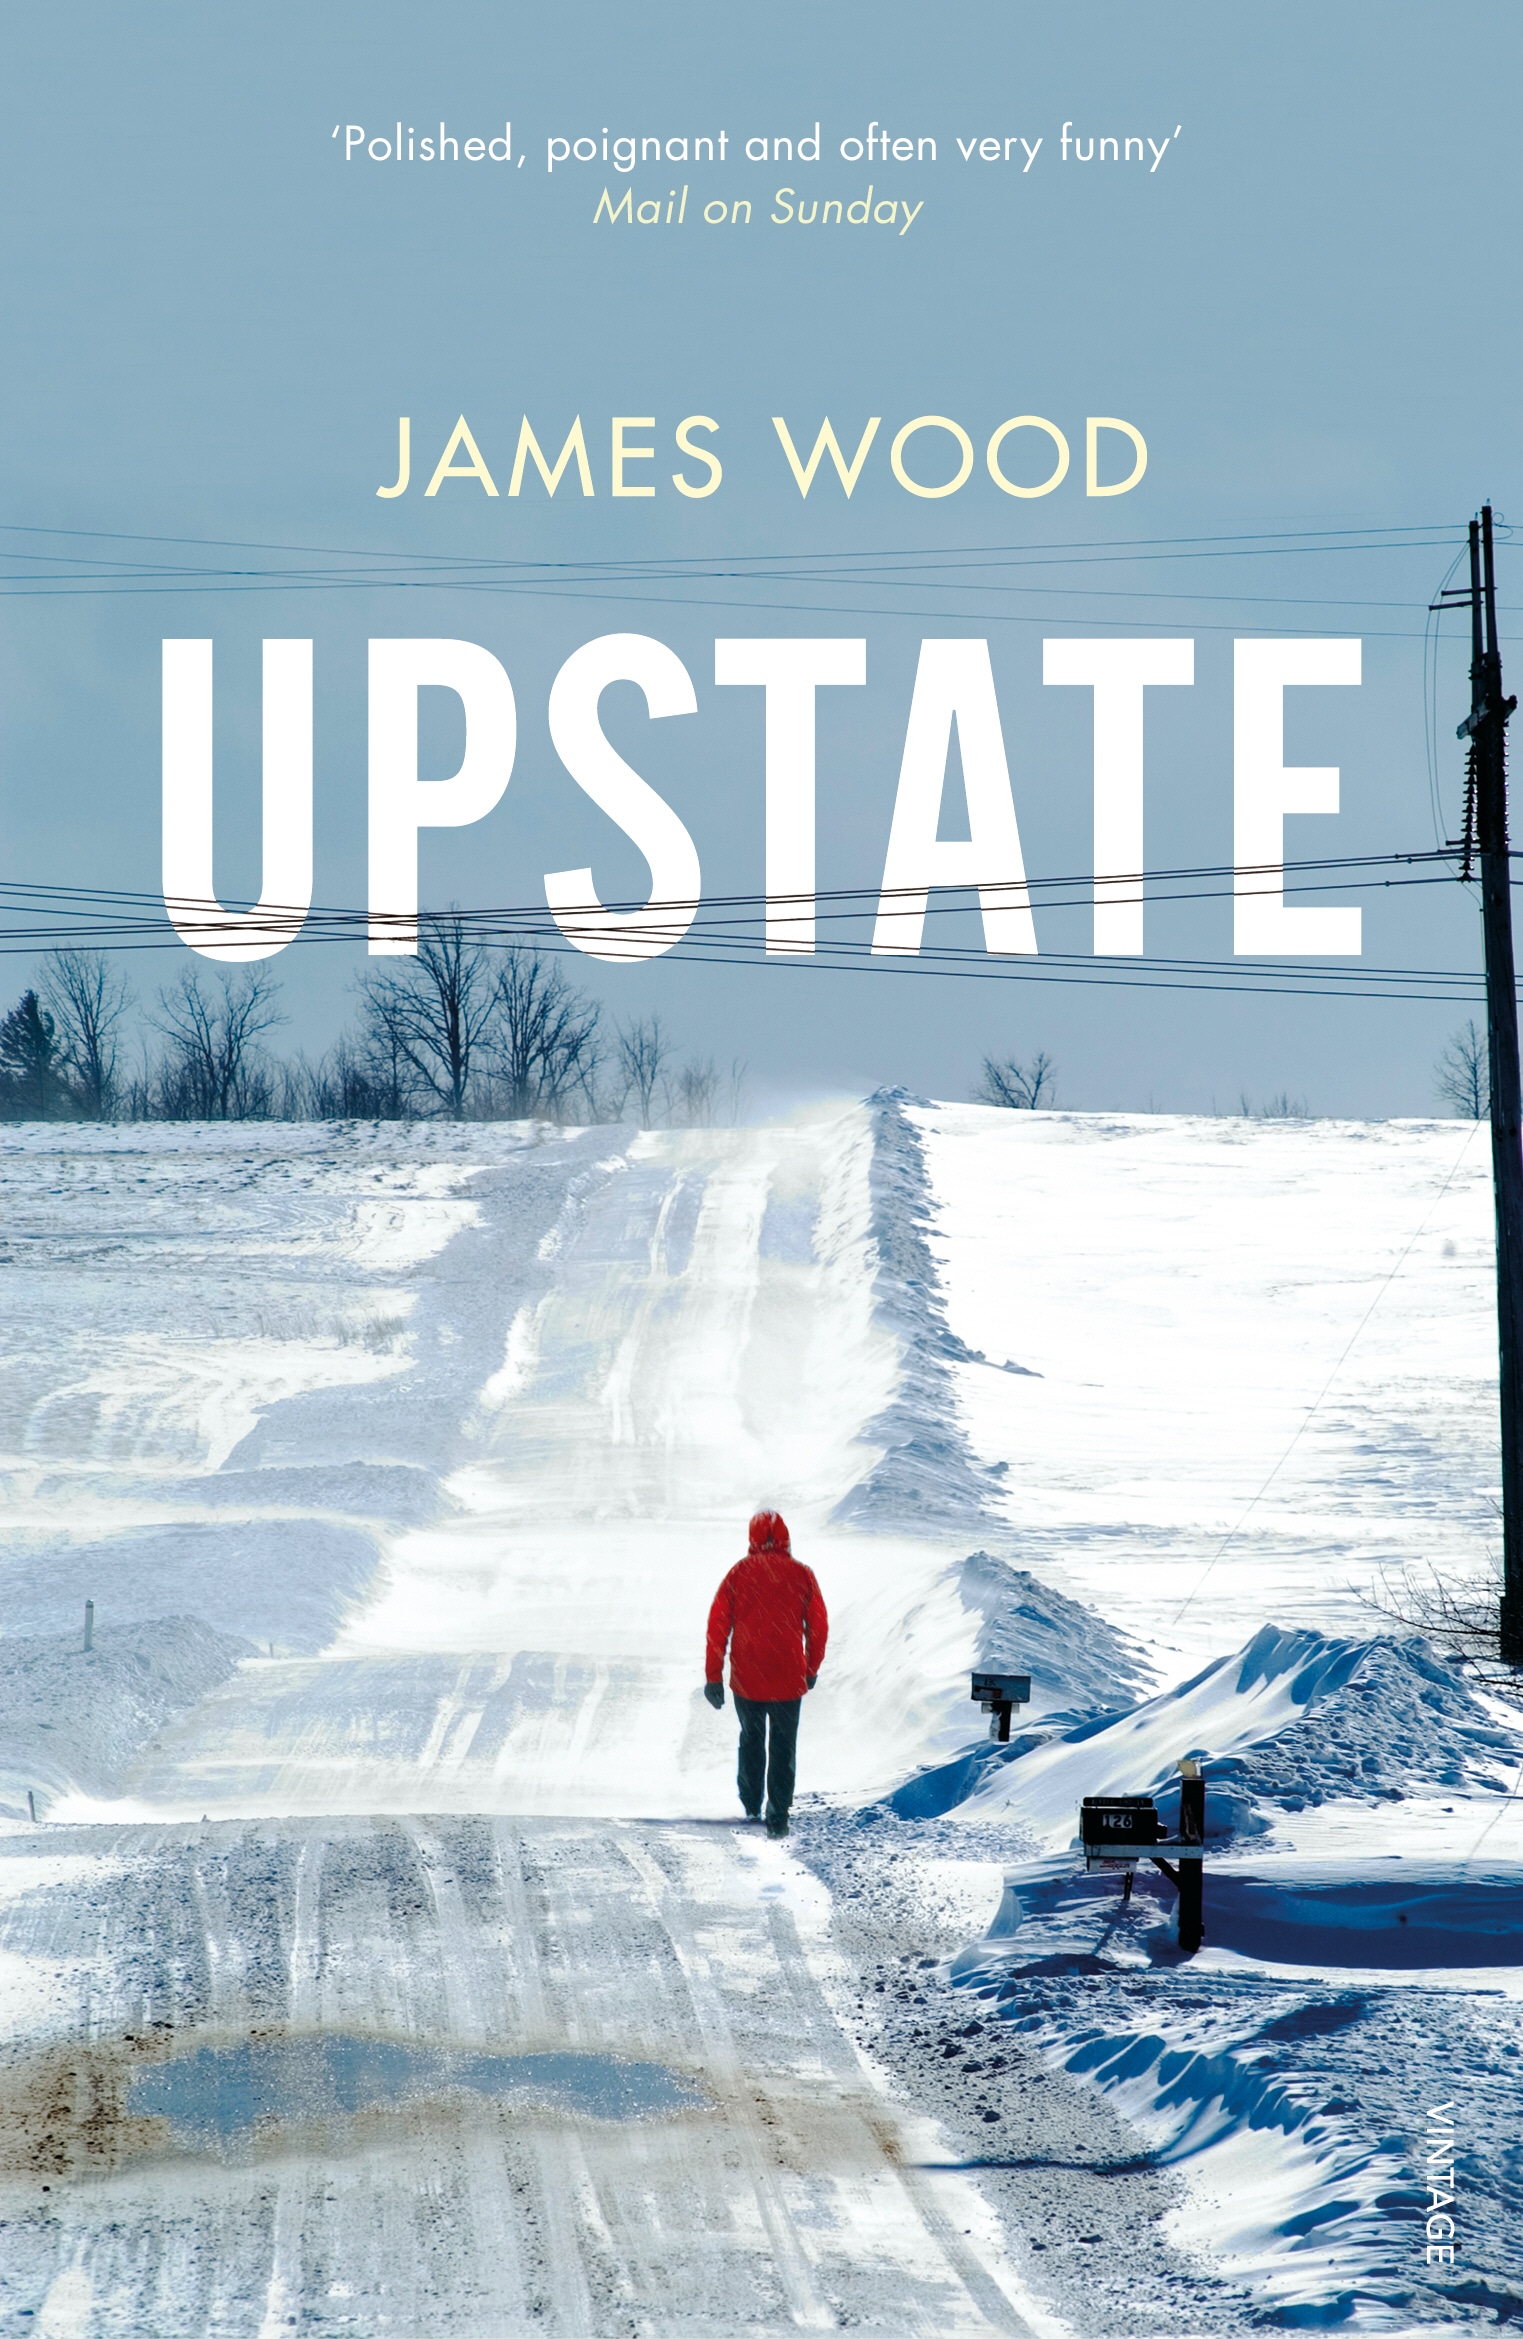 Book “Upstate” by James Wood — March 7, 2019